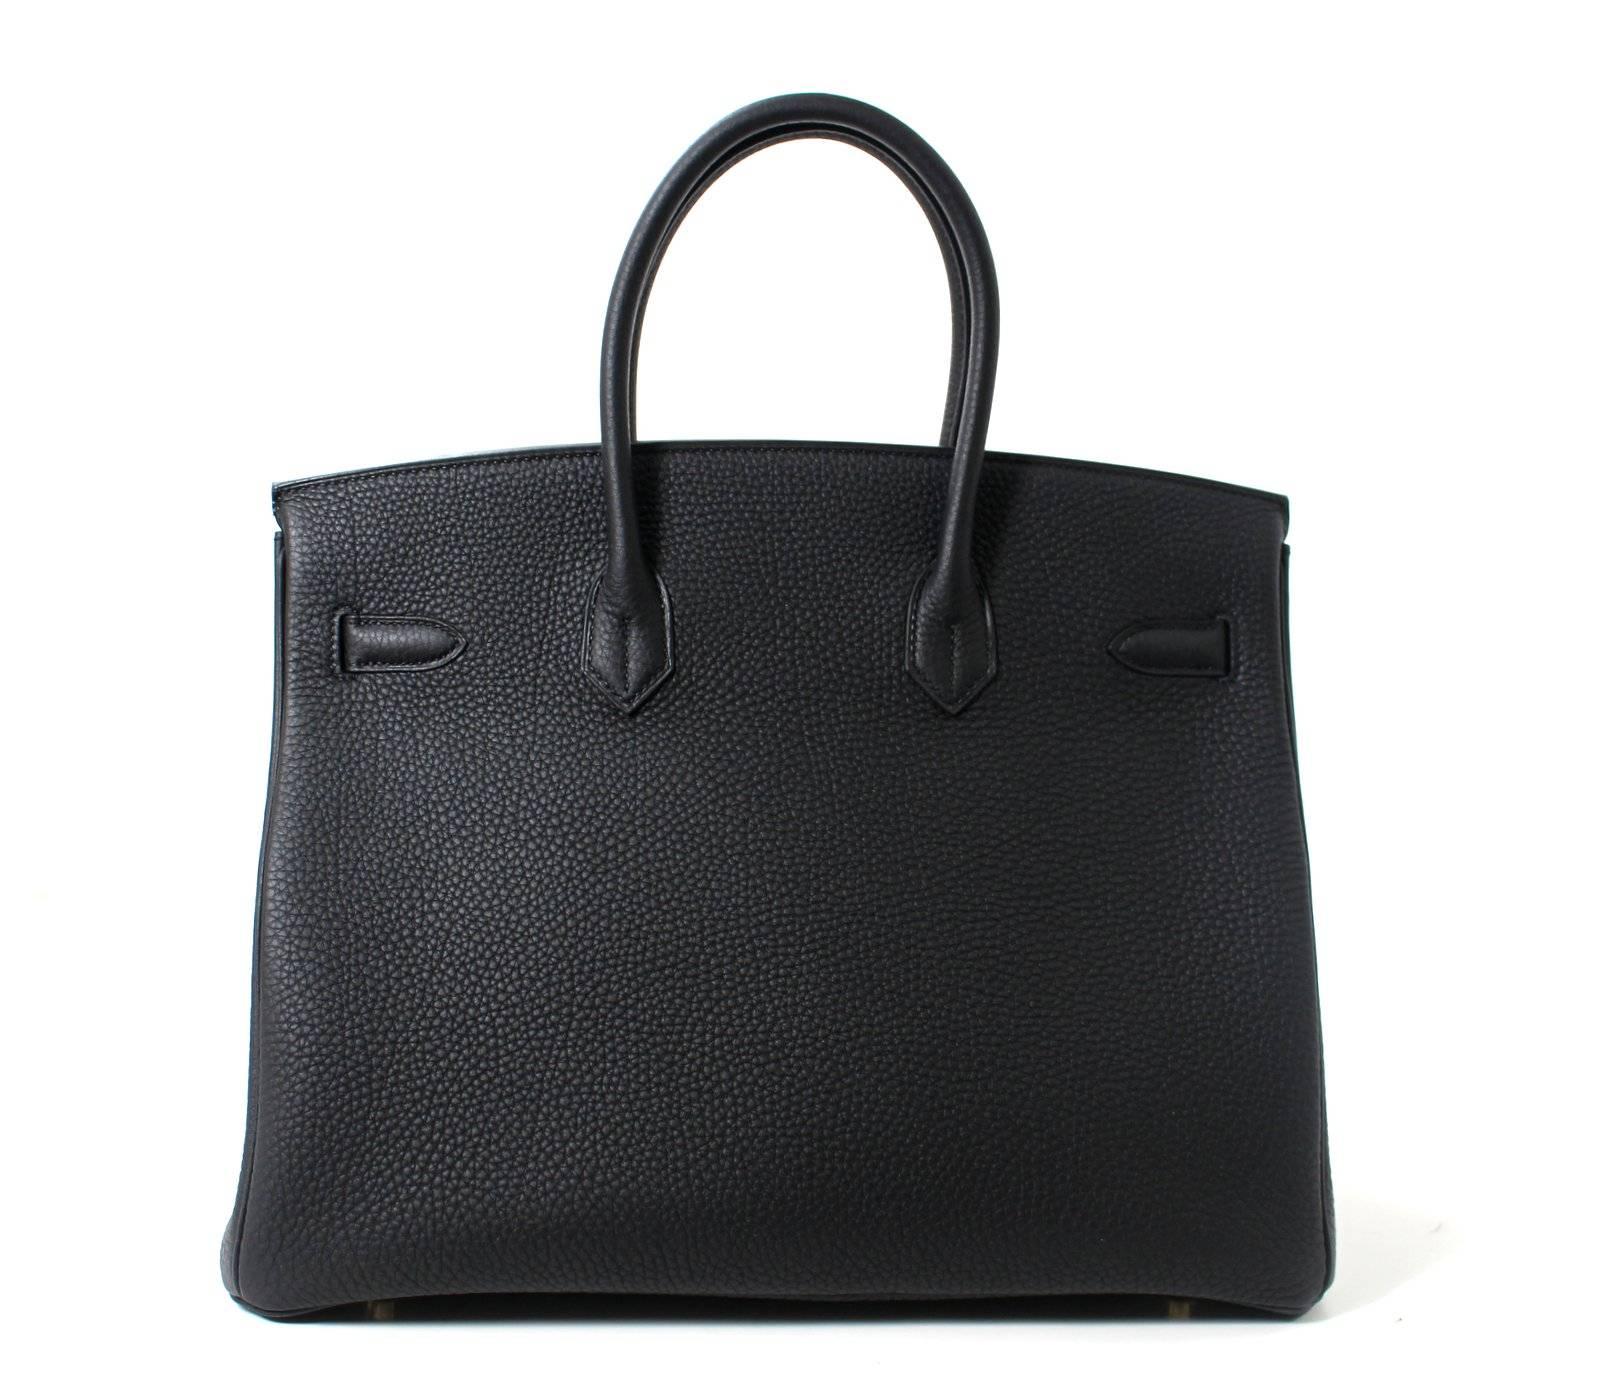 Pristine, store fresh condition (plastic on hardware) Hermès Birkin Bag in Black Togo Leather, GHW 35 cm, T stamp
Crafted by hand and considered by many as the epitome of luxury items, Birkins are in extremely high demand but very difficult to